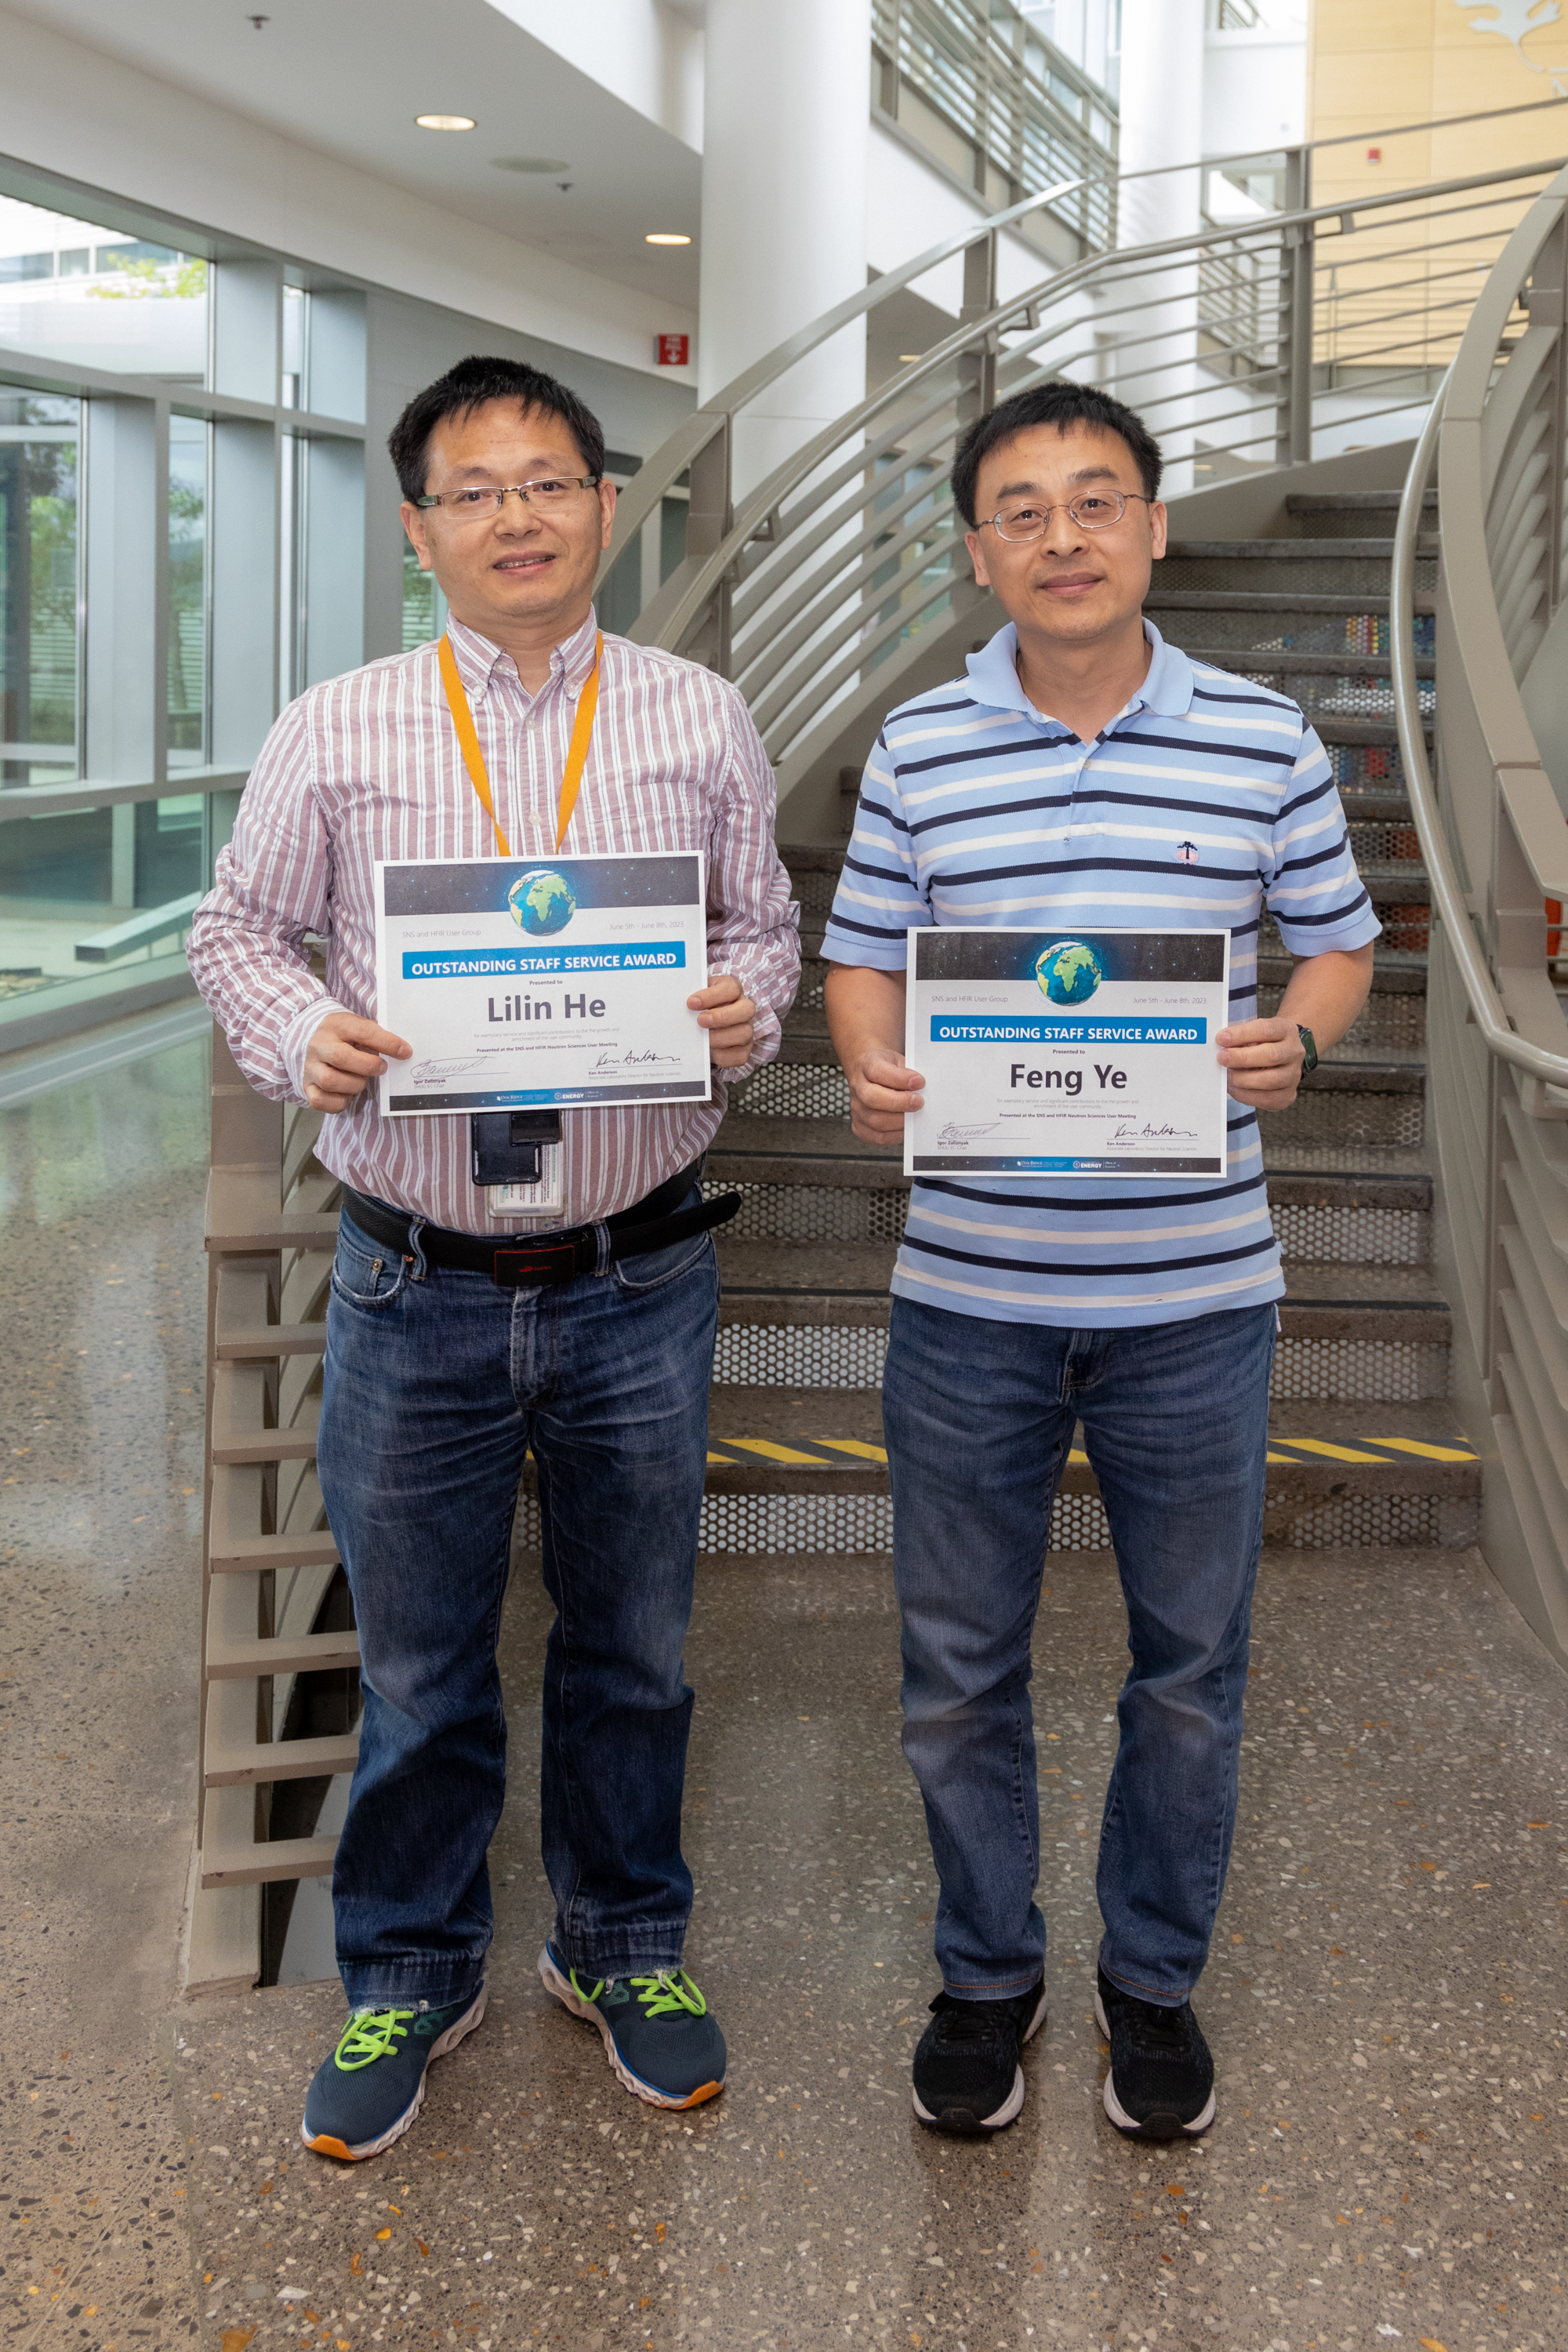 Recipients of 2023 Outstanding Staff Service Award: Lilin He (left), Instrument Scientist for CG-2 GP-SANS at HFIR, and Feng Ye, Instrument Scientist for BL-9 CORELLI at SNS.